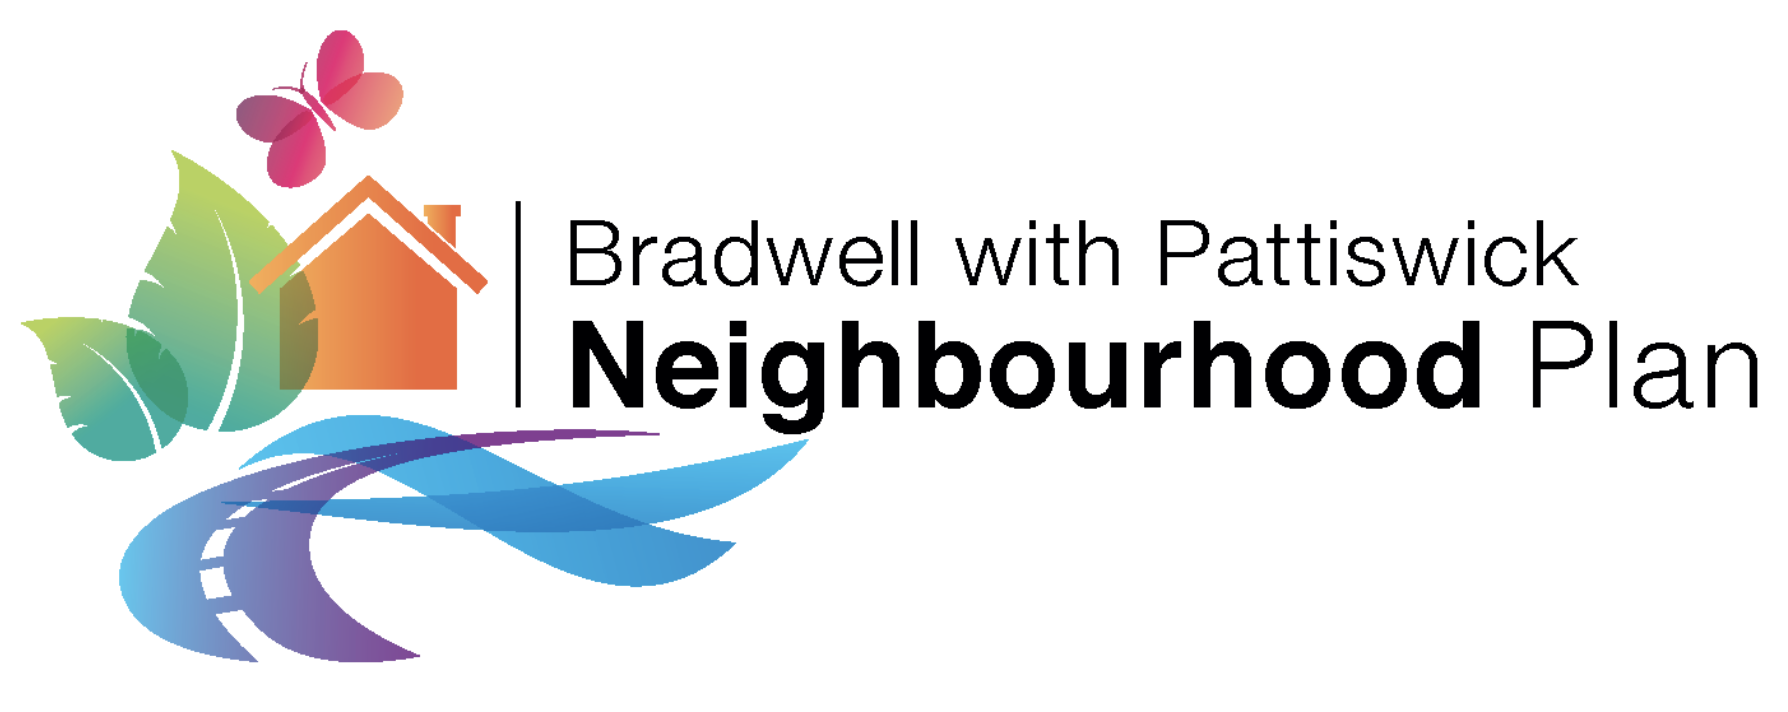 Text saying Bradwell with pattiswick Neighbourhood plan with abstract graphic of a house, road and leaf